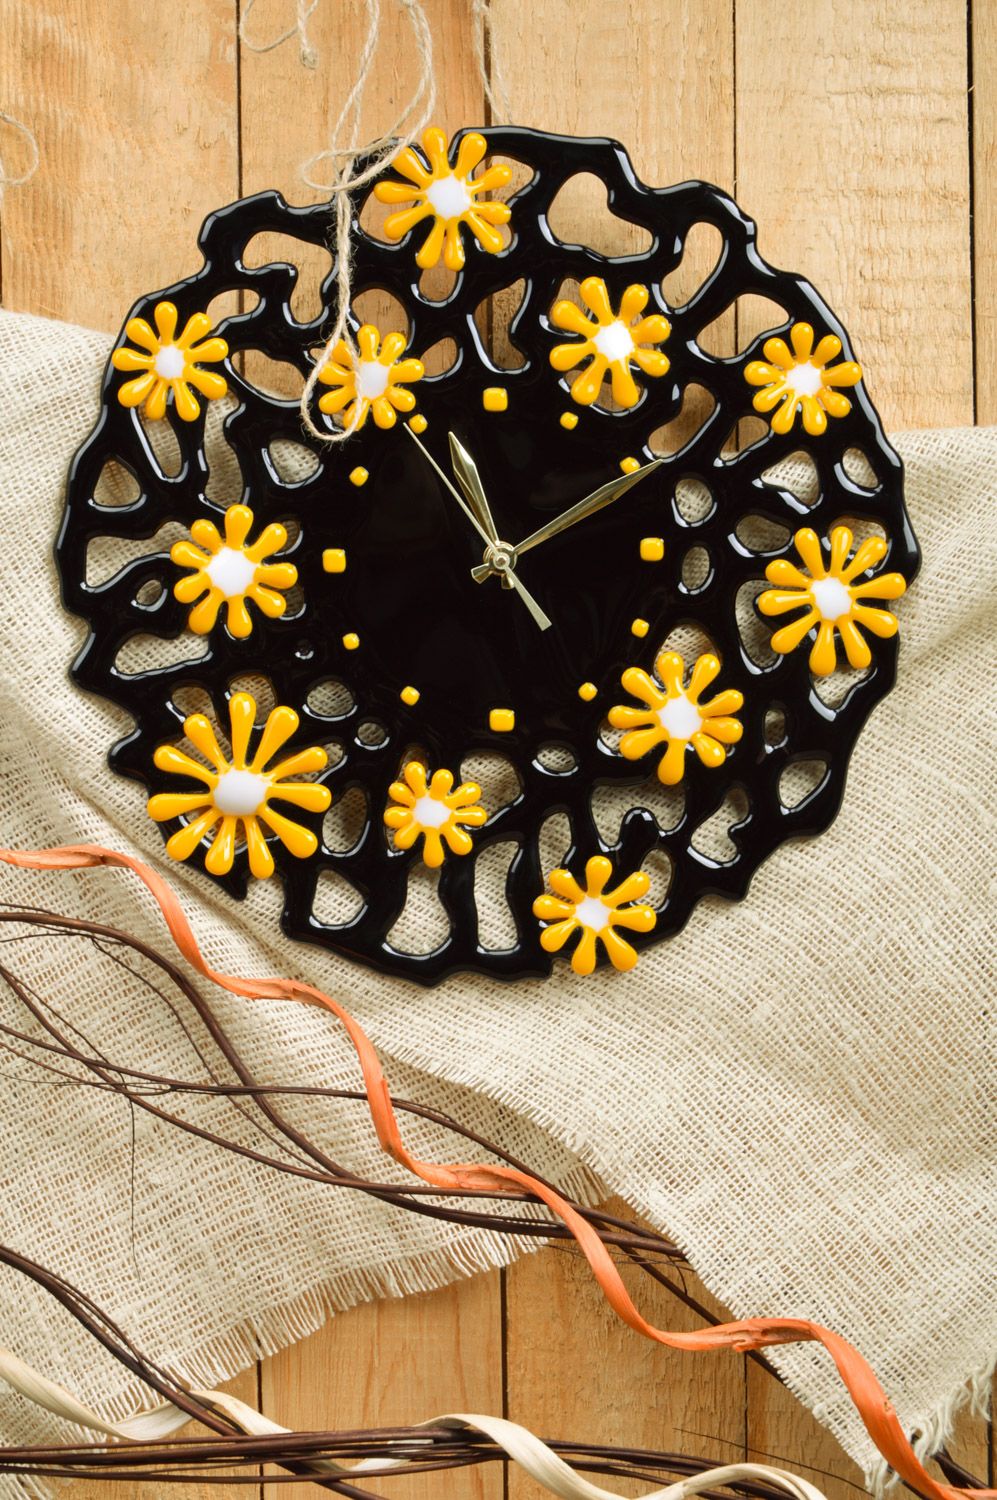 Handmade decorative round fused glass wall clock in black and yellow colors photo 1